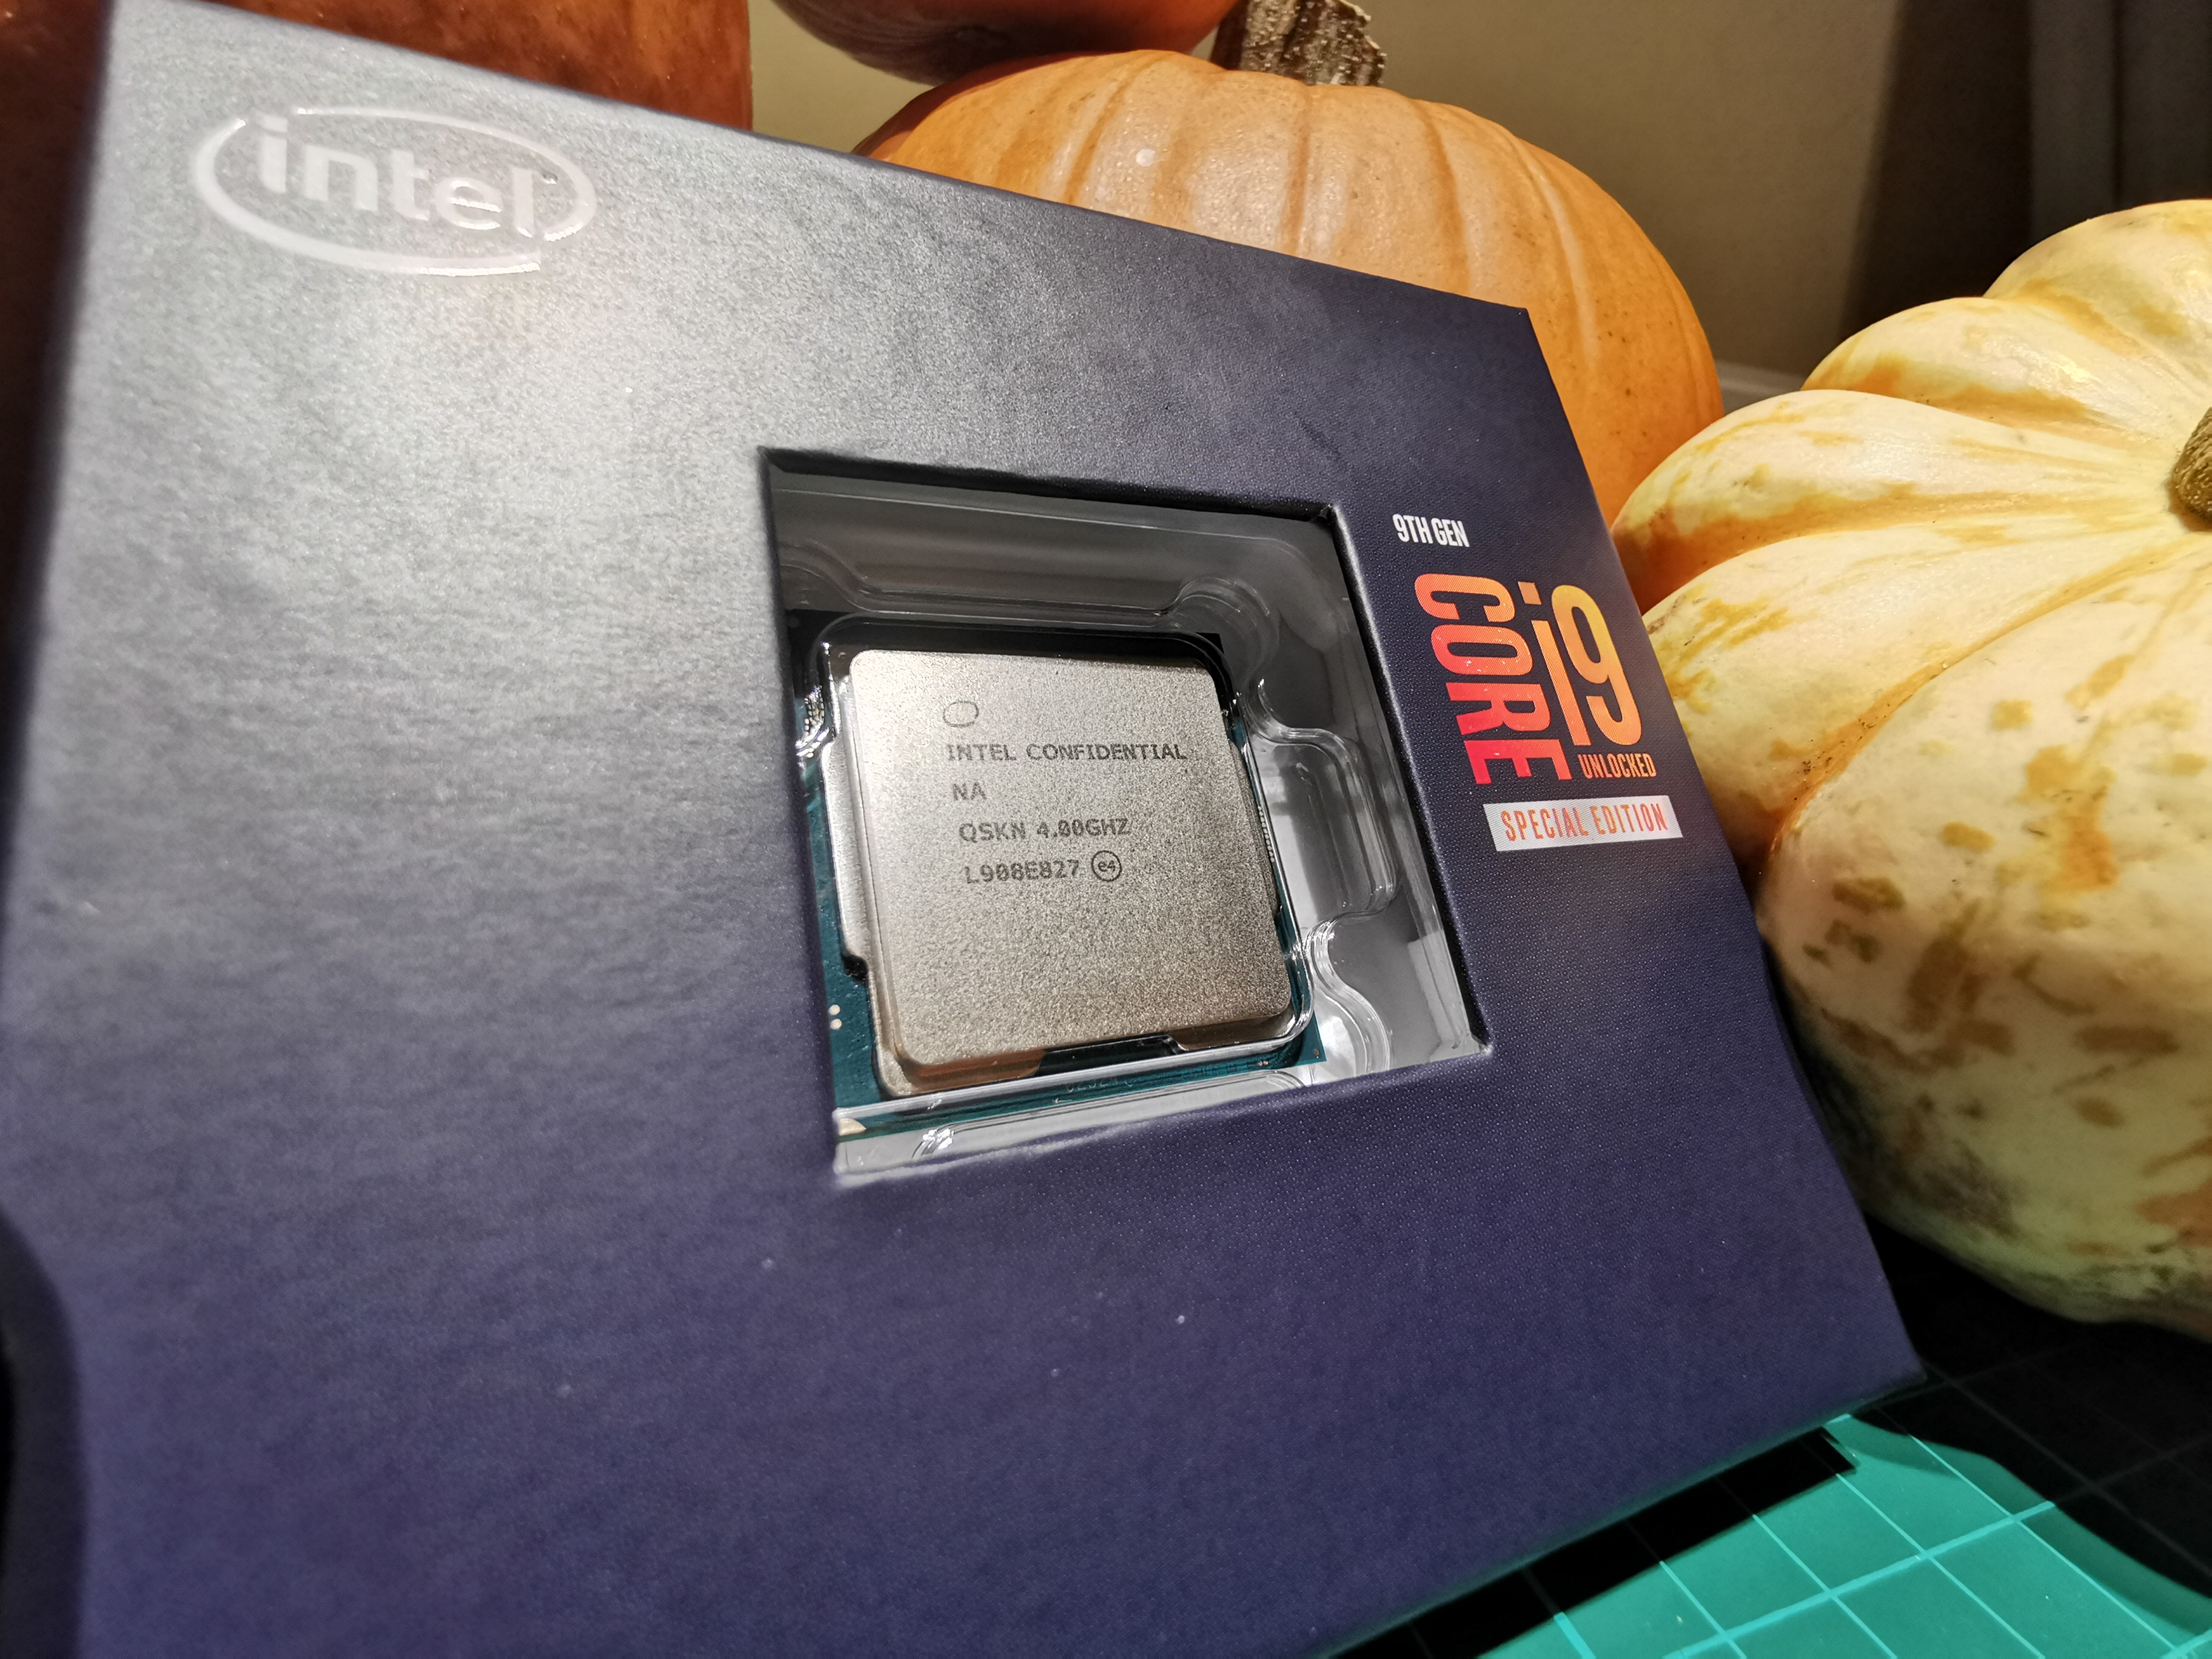 Conclusion: You Will Have To Be Quick - The Intel Core i9-9900KS